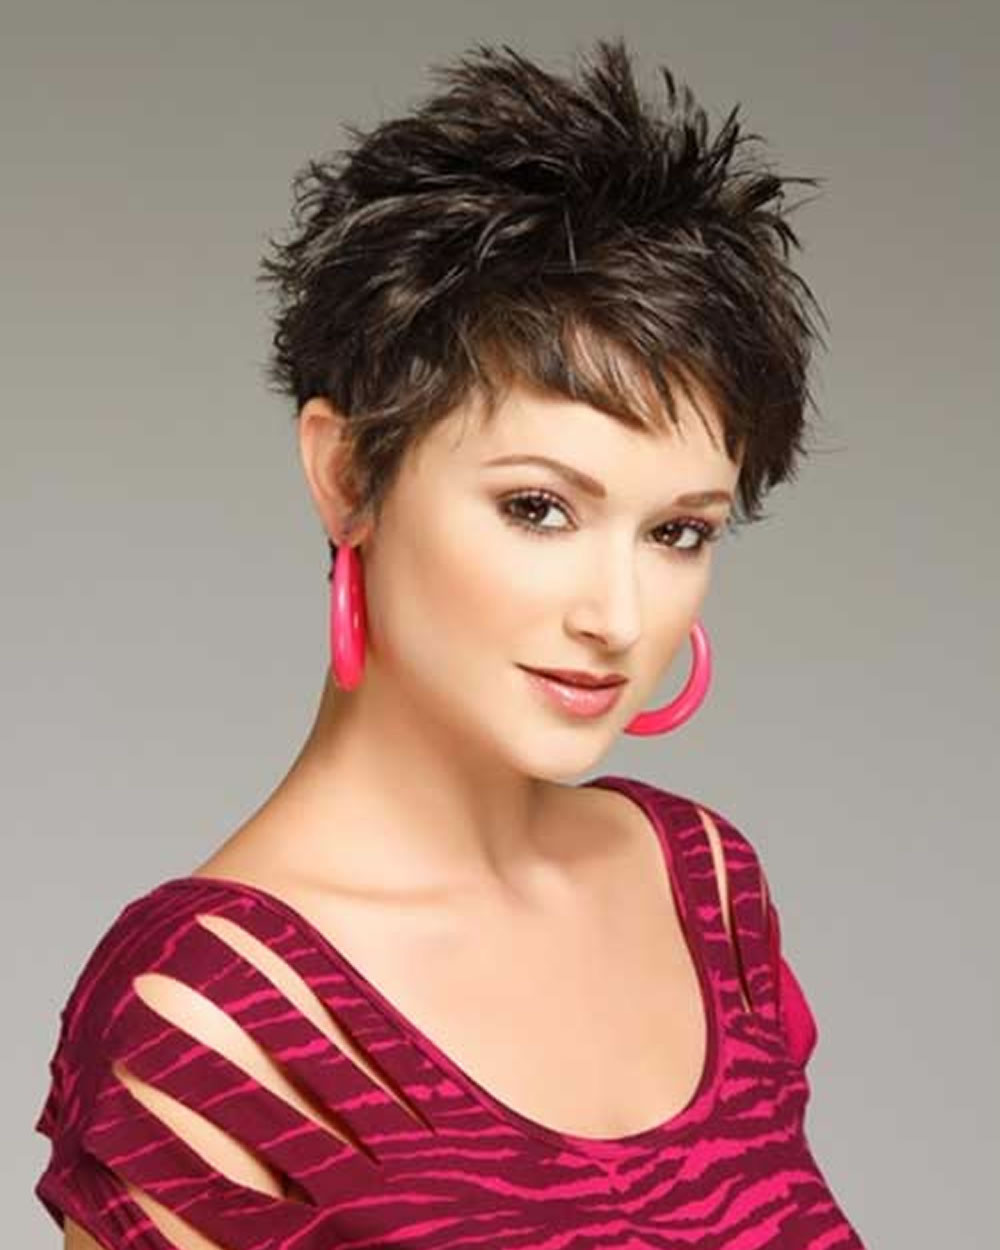 Short Spiky Hairstyles For Fine Hair
 Short Spiky Haircuts & Hairstyles for Women 2018 – Page 7